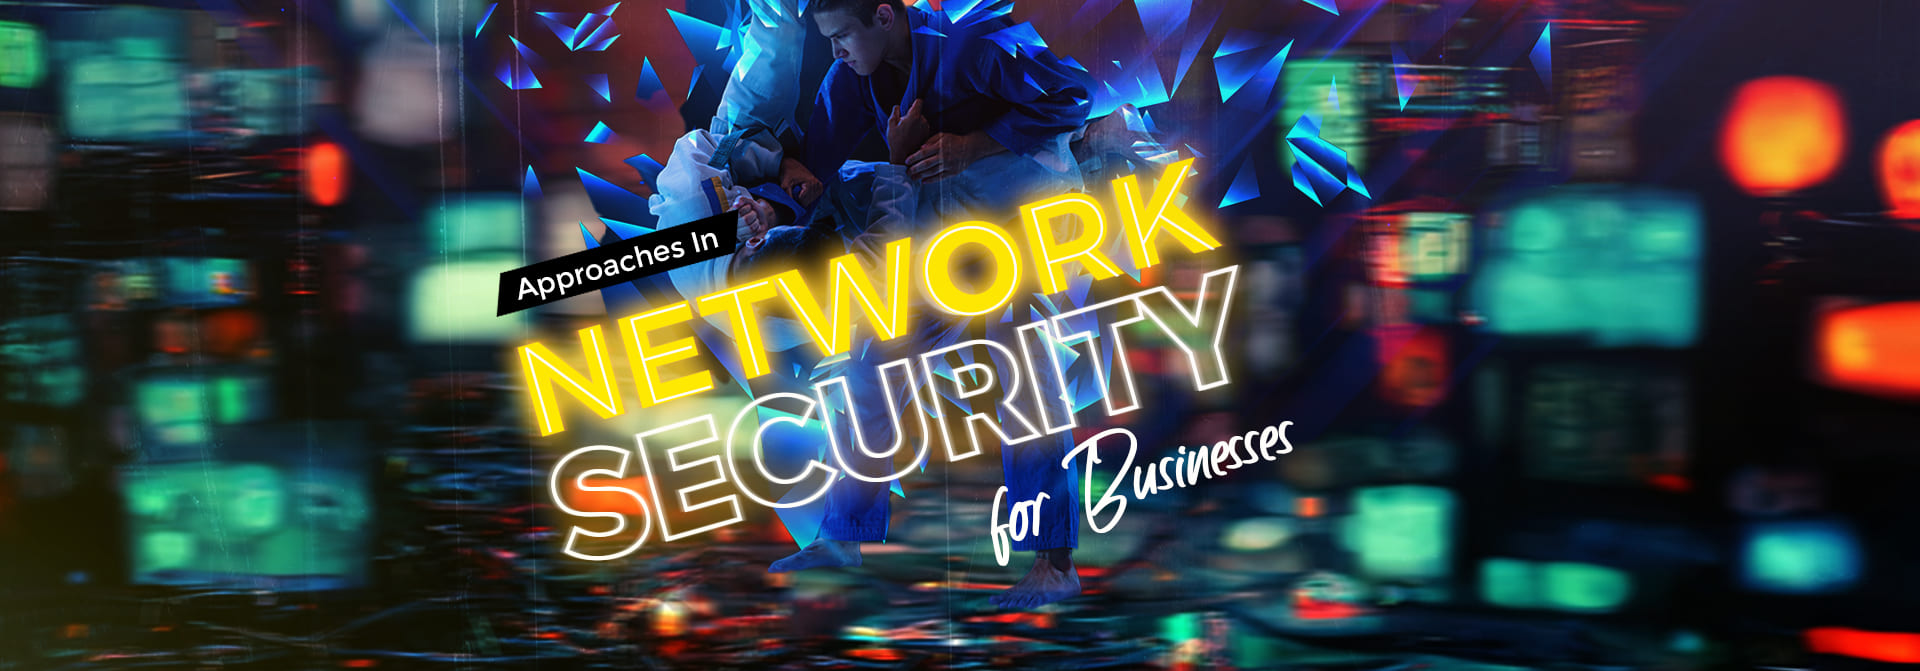 Network Security_banner